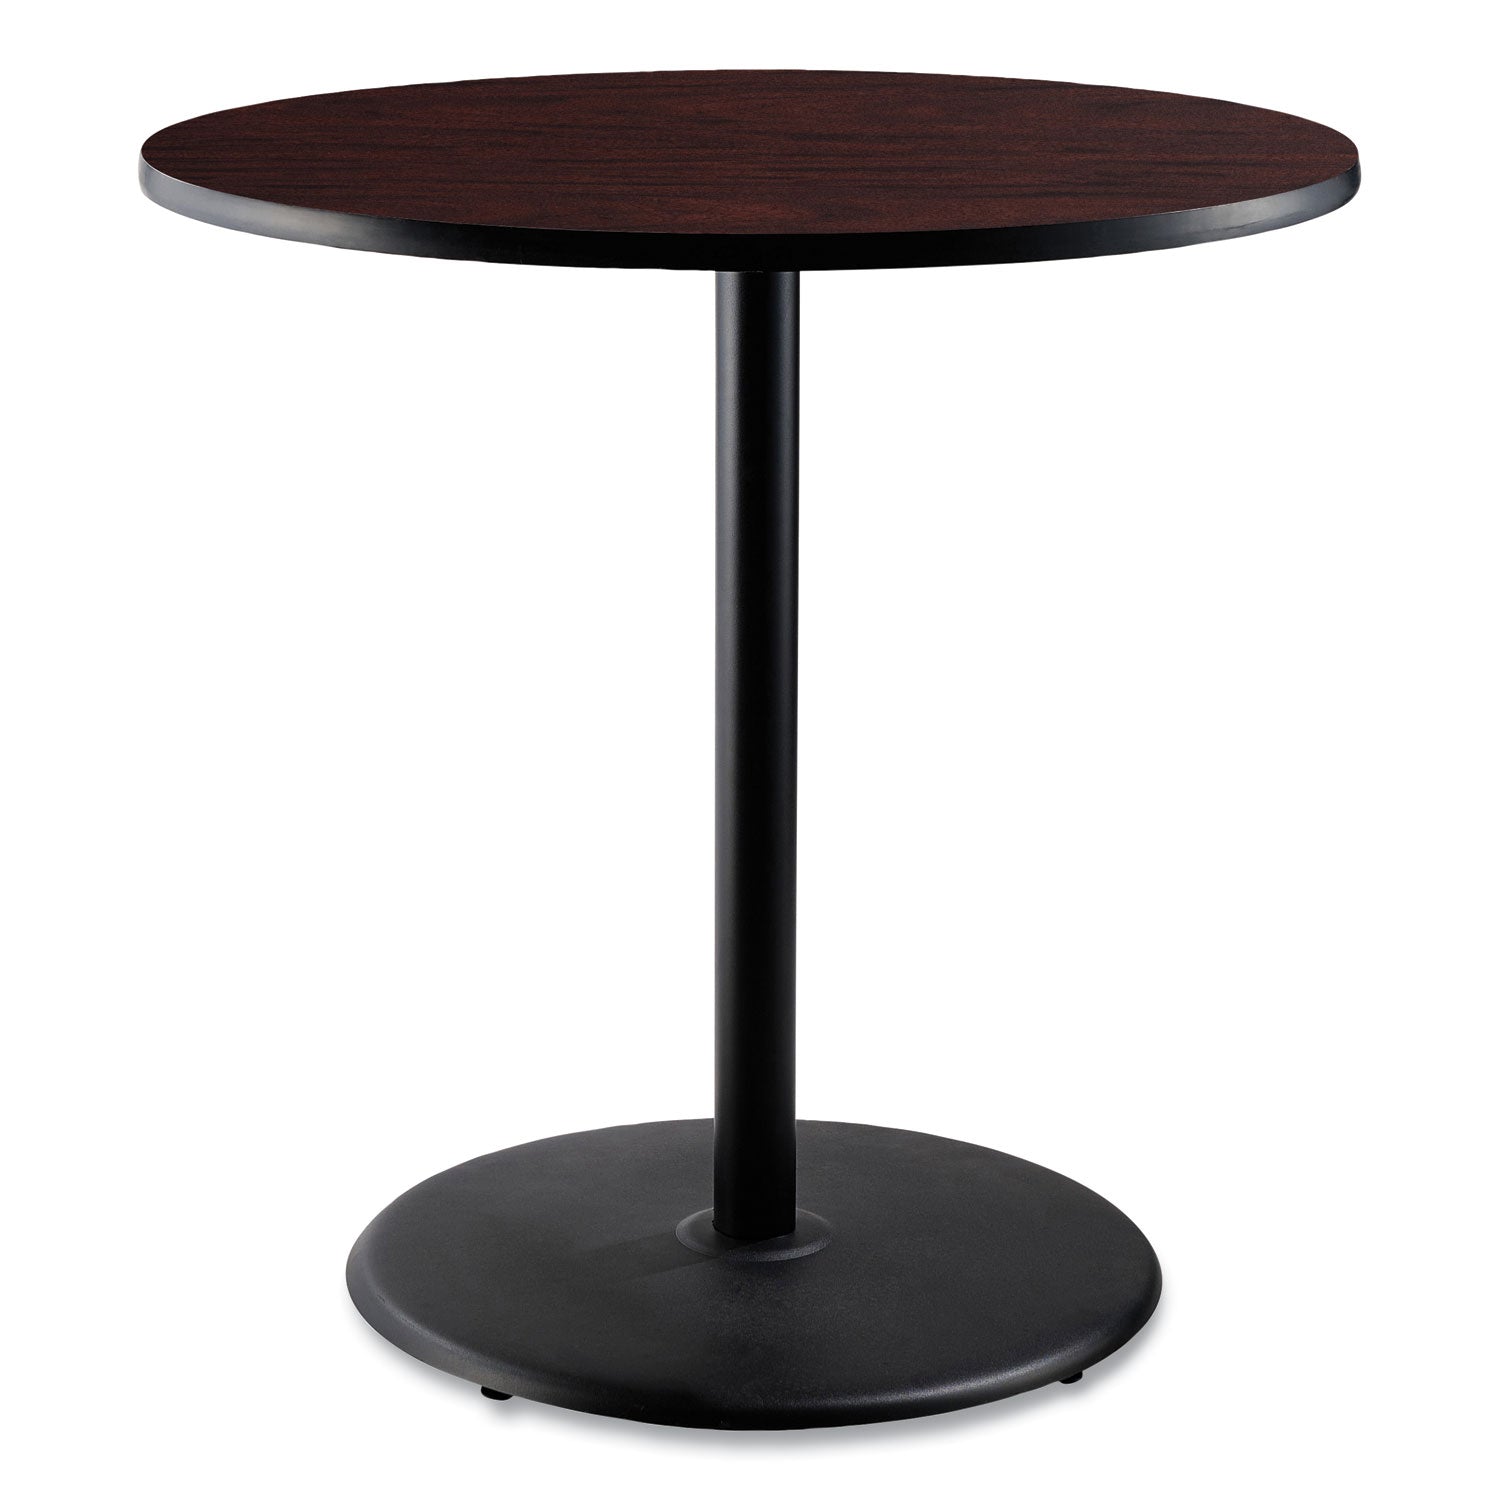 cafe-table-36-diameter-x-42h-round-top-base-mahogany-top-black-base-ships-in-7-10-business-days_npsct13636rb1my - 1